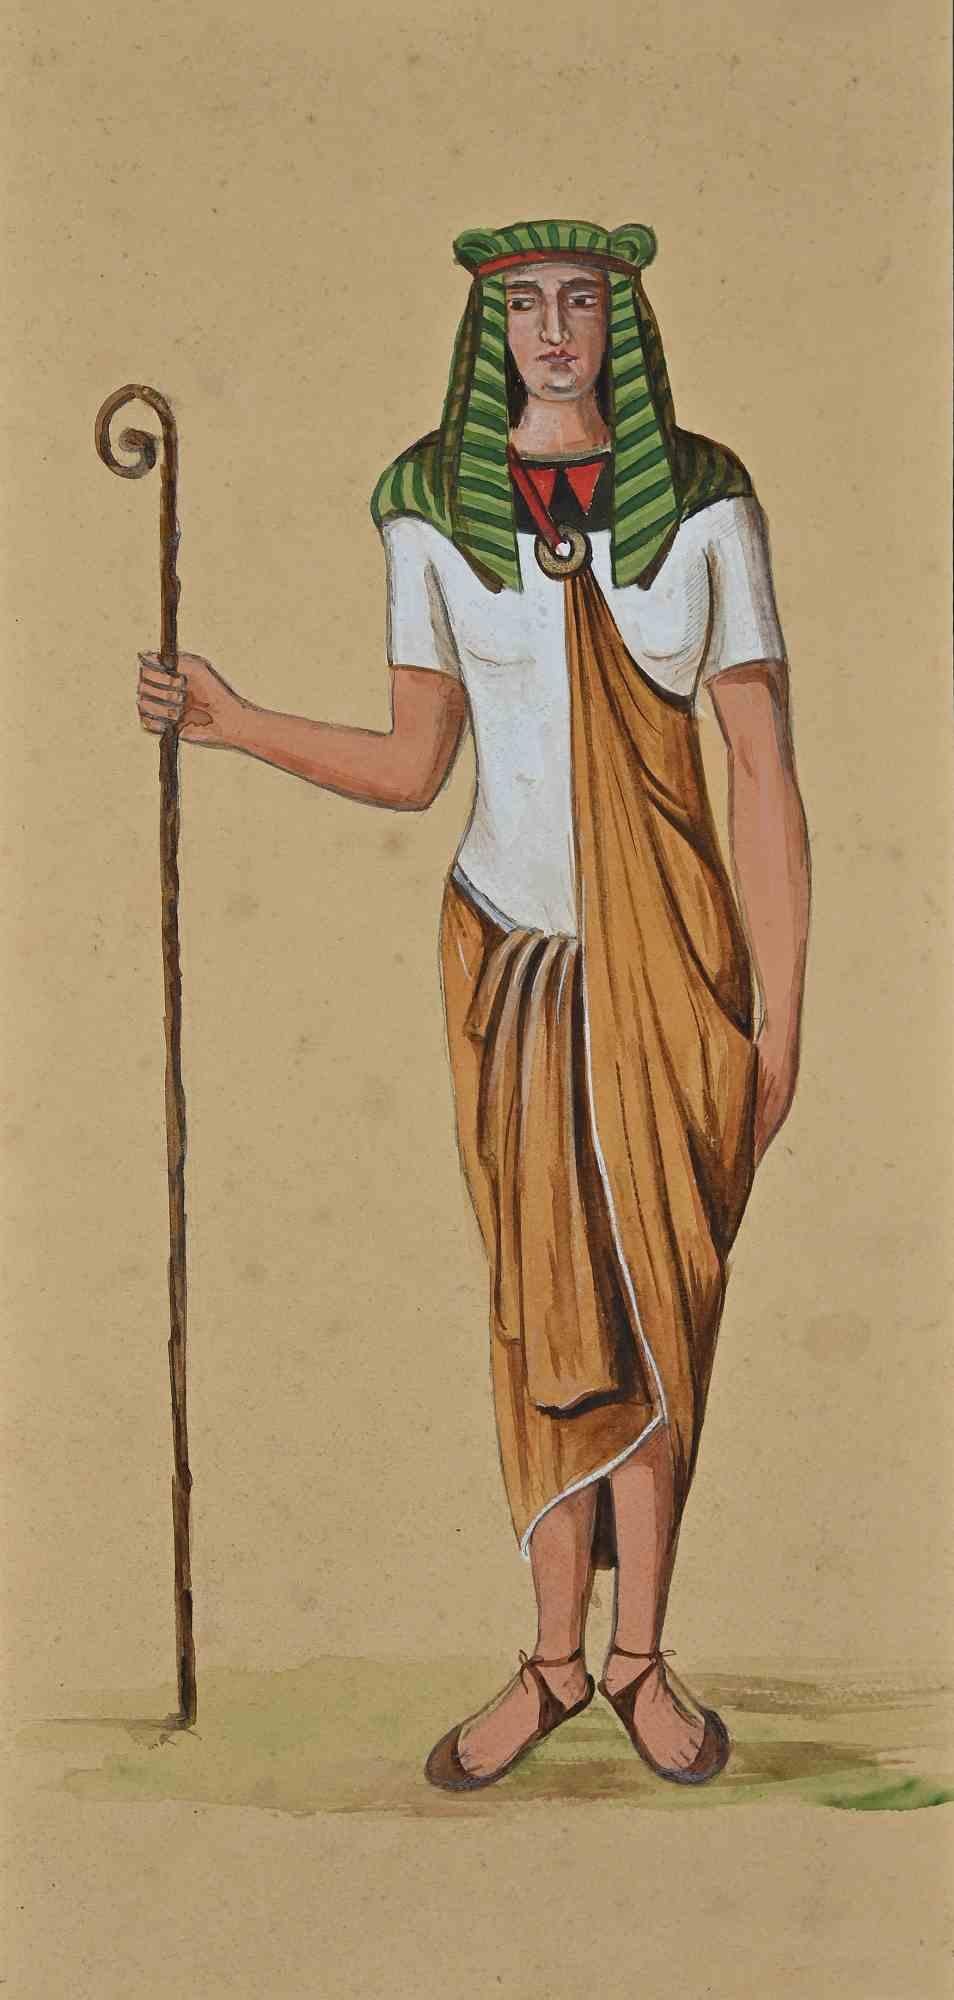 Unknown Figurative Art - Study for Scenograpy on Ancient Egypt - Drawing - Early 20th Century